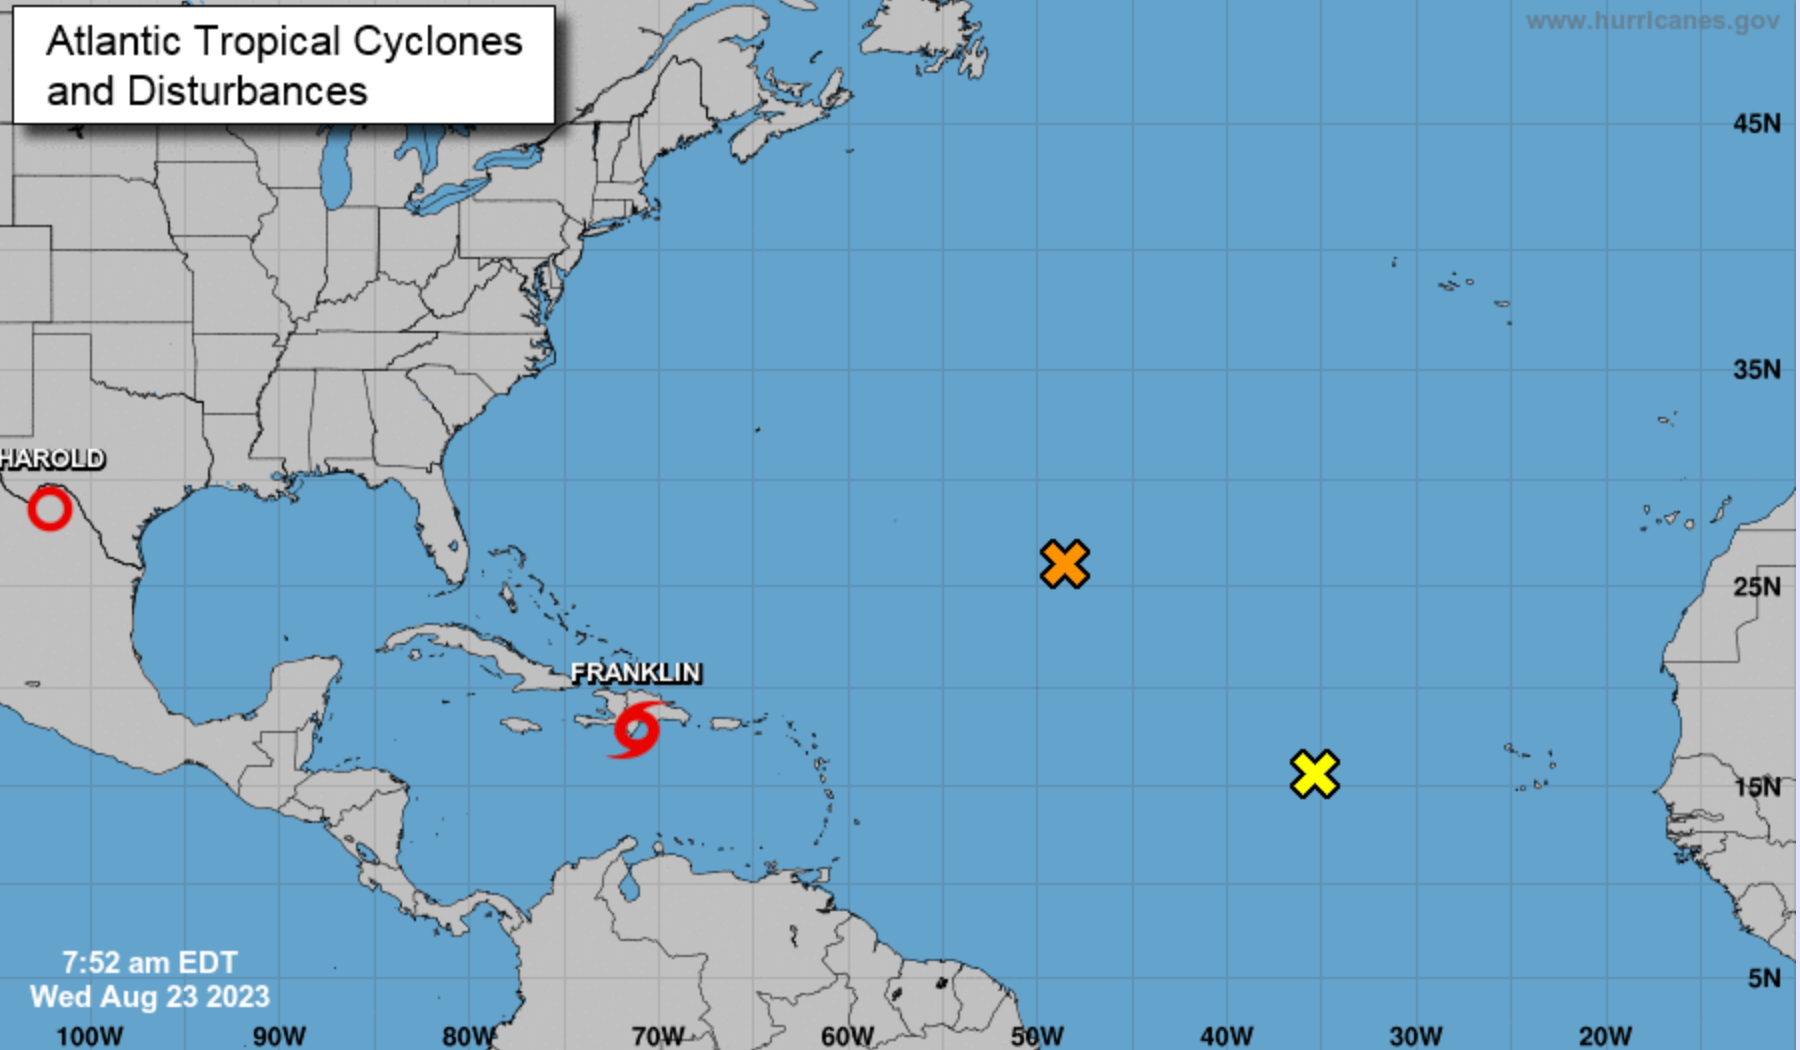 A record number of tropical storms and disturbances have formed in the last 39 hours